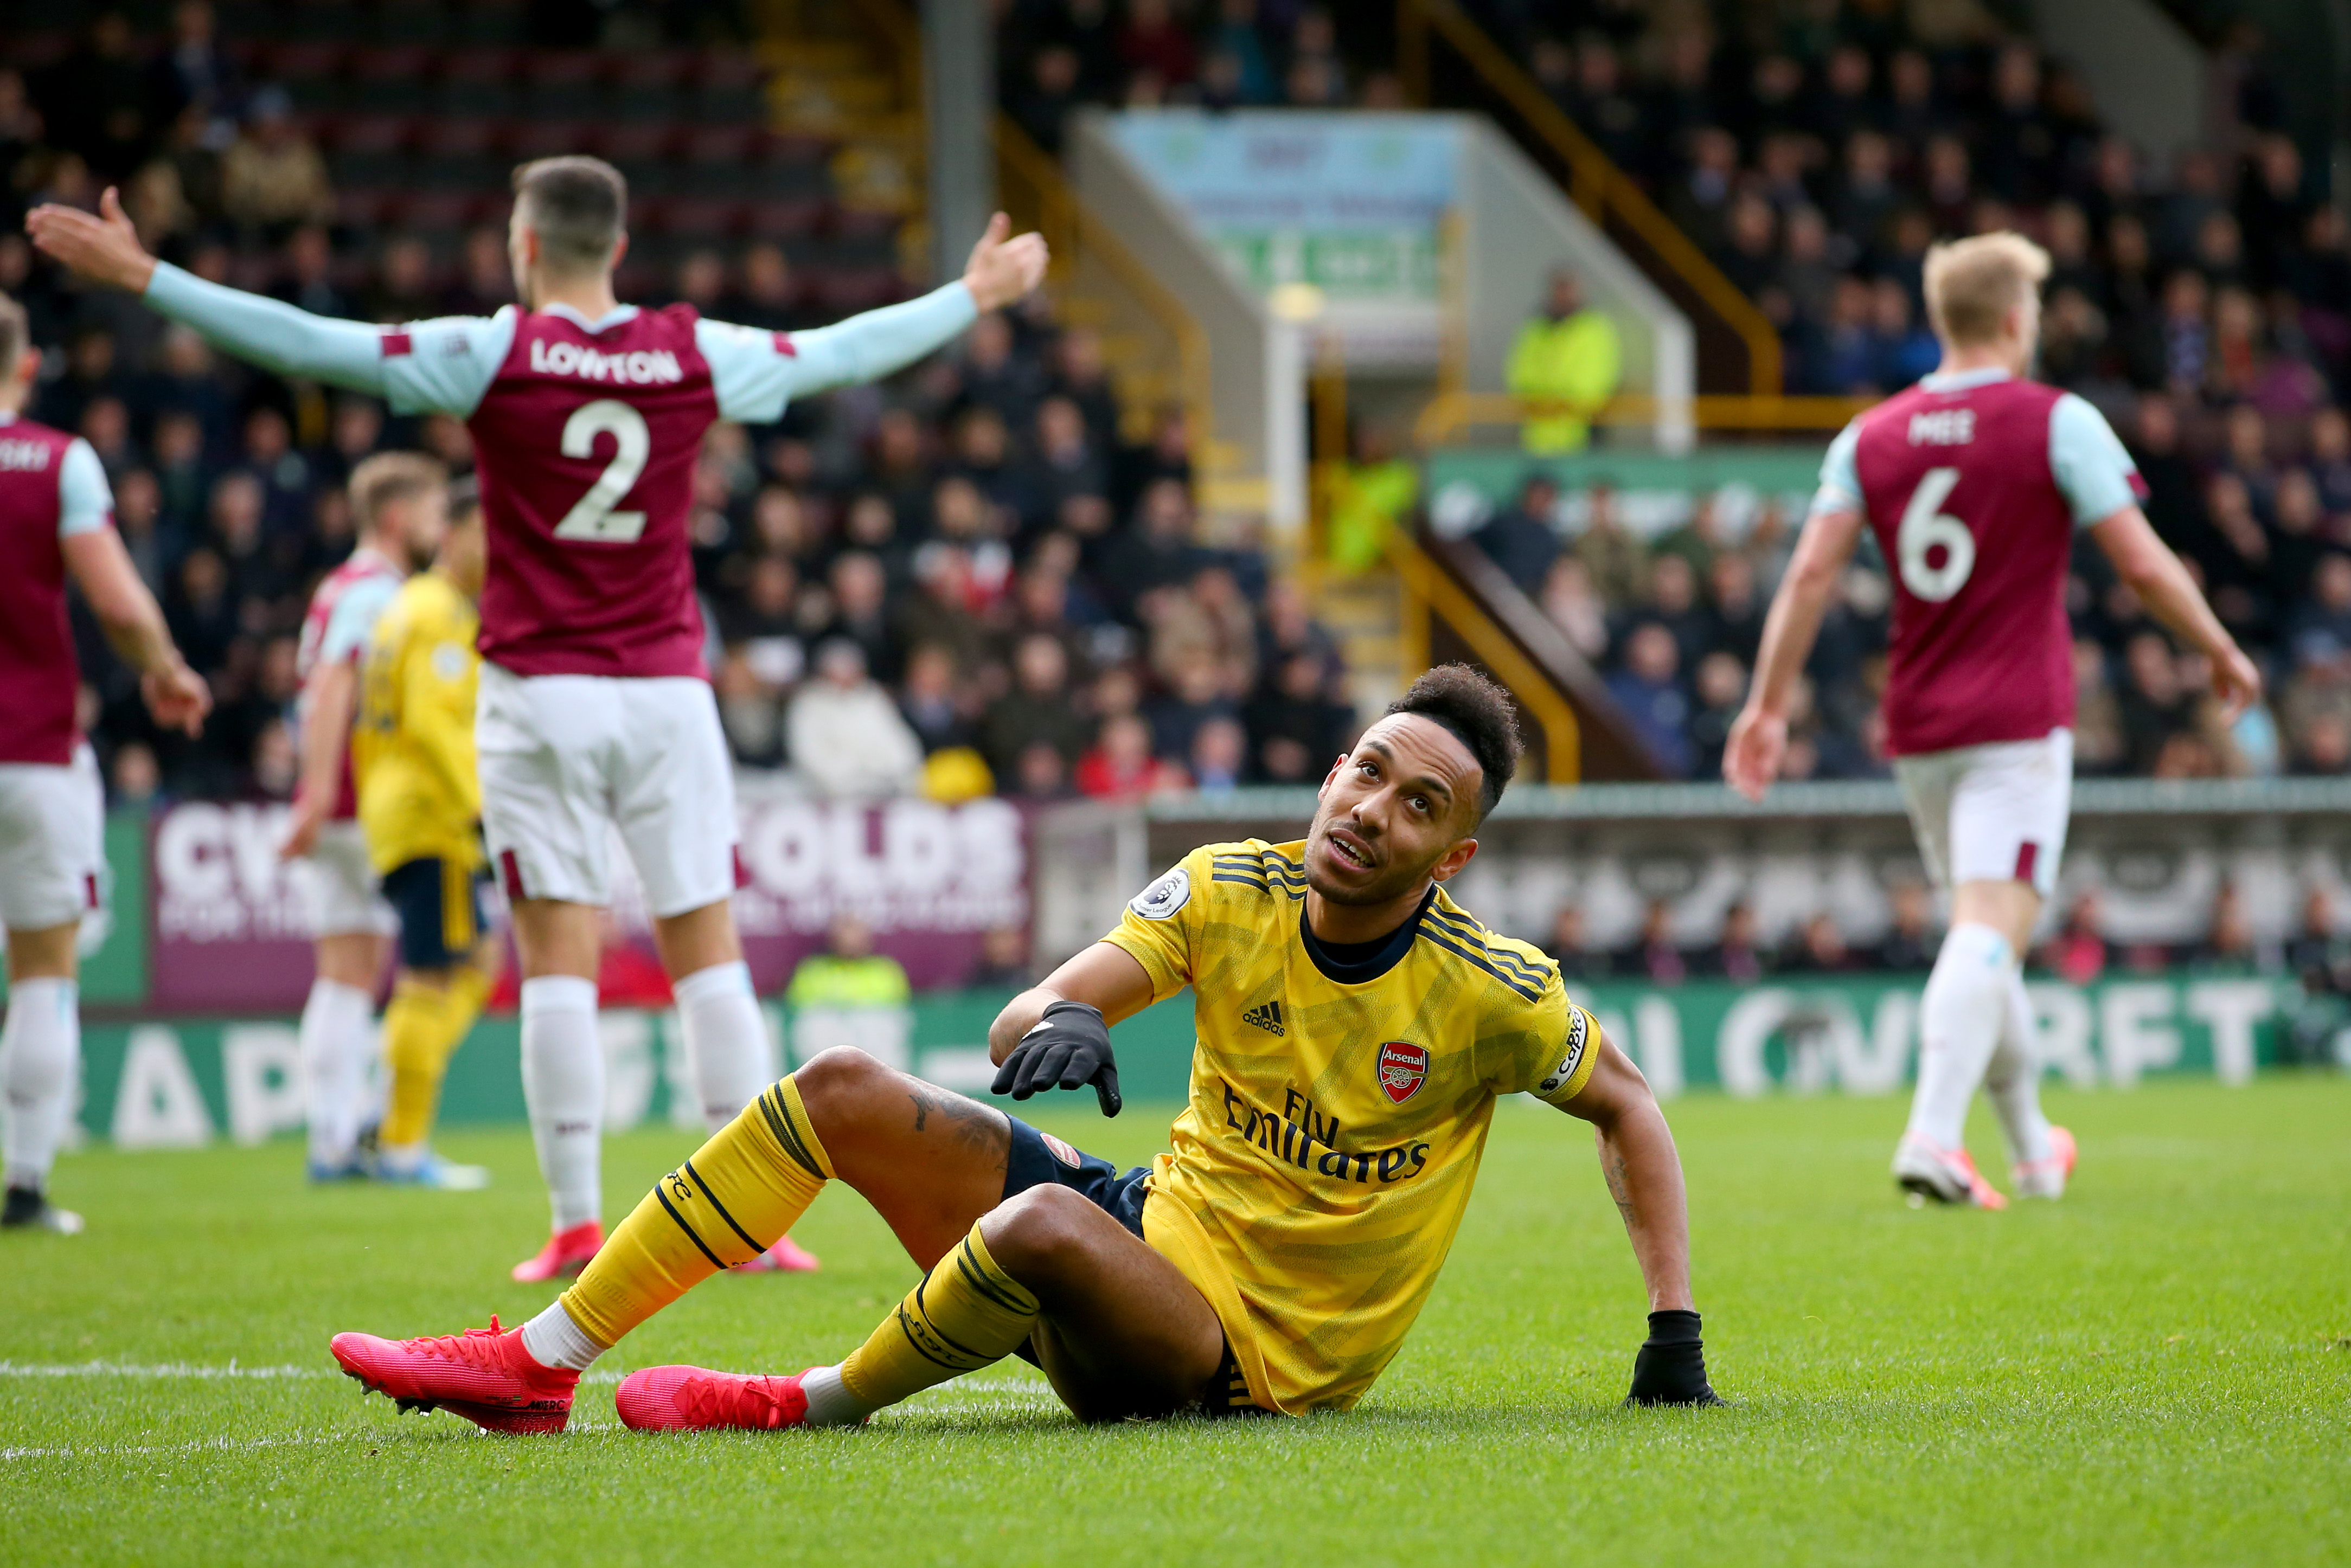 BURNLEY, ENGLAND - FEBRUARY 02: Pierre-Emerick Aubameyang of Arsenal reacts during the Premier League match between Burnley FC and Arsenal FC at Turf Moor on February 02, 2020 in Burnley, United Kingdom. (Photo by Alex Livesey/Getty Images)